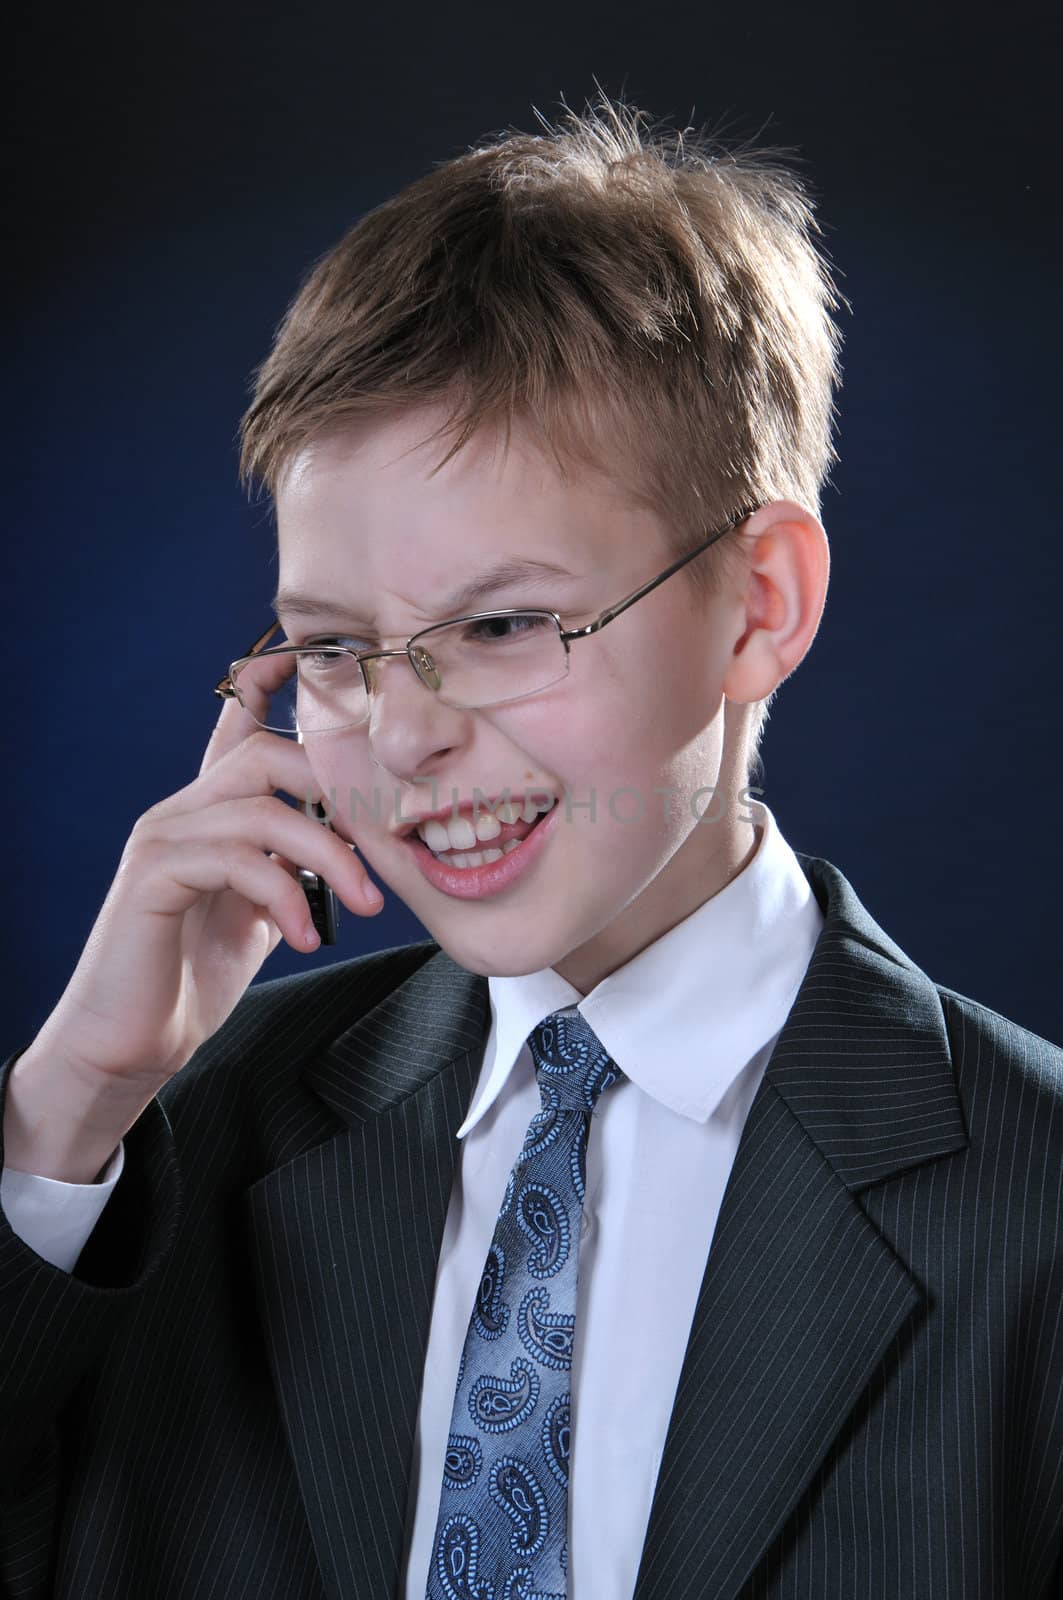 Boy in Suit on Cellphone by dyoma